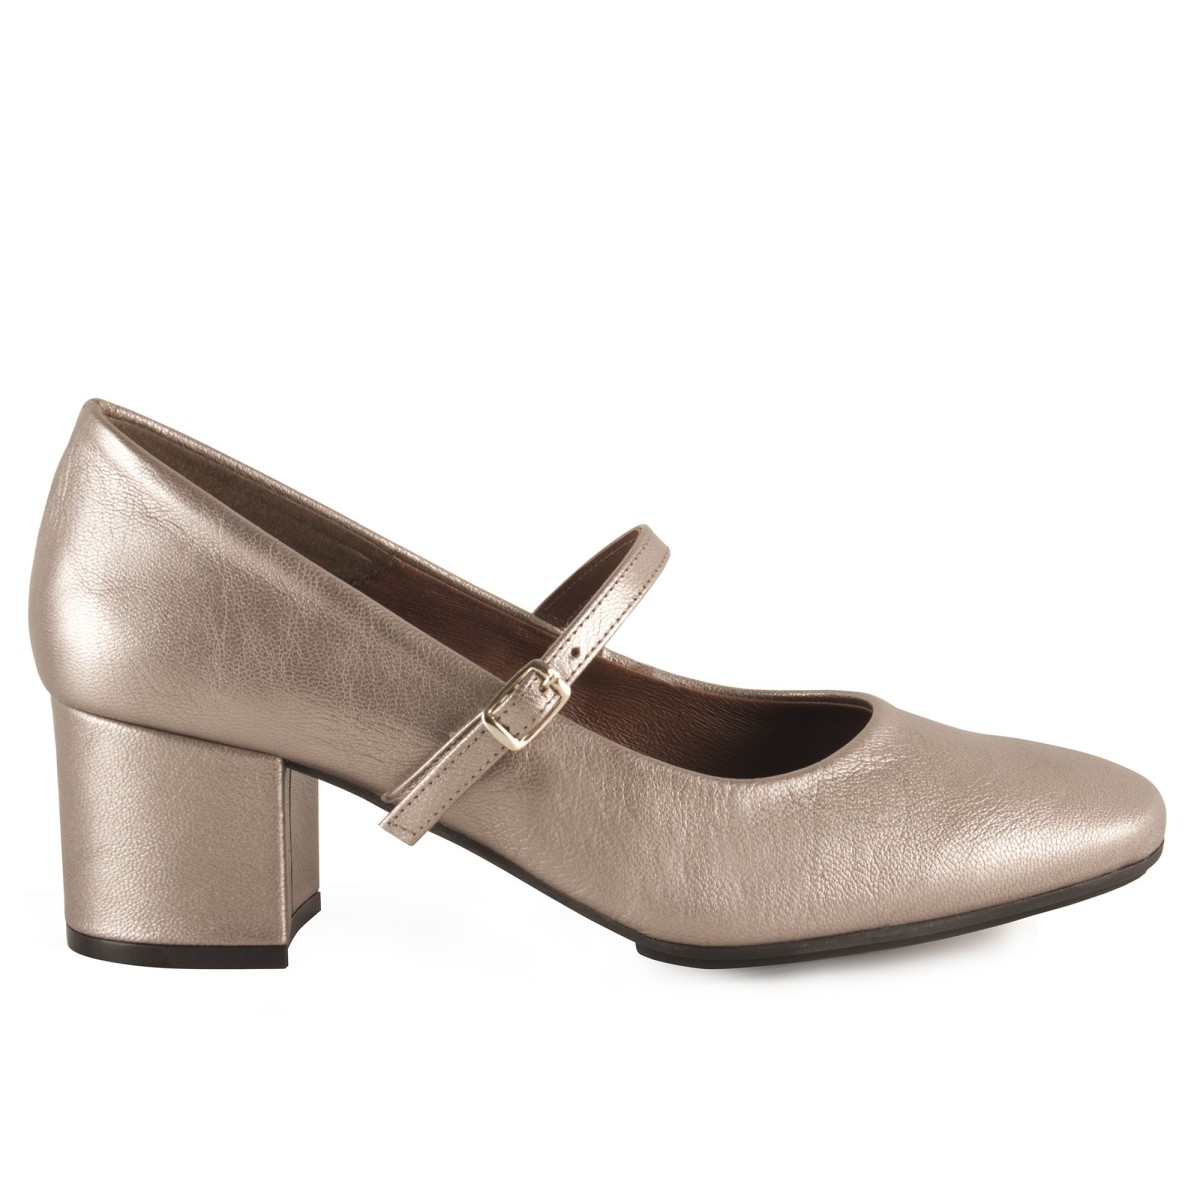 Metallic leather pumps by Chamby